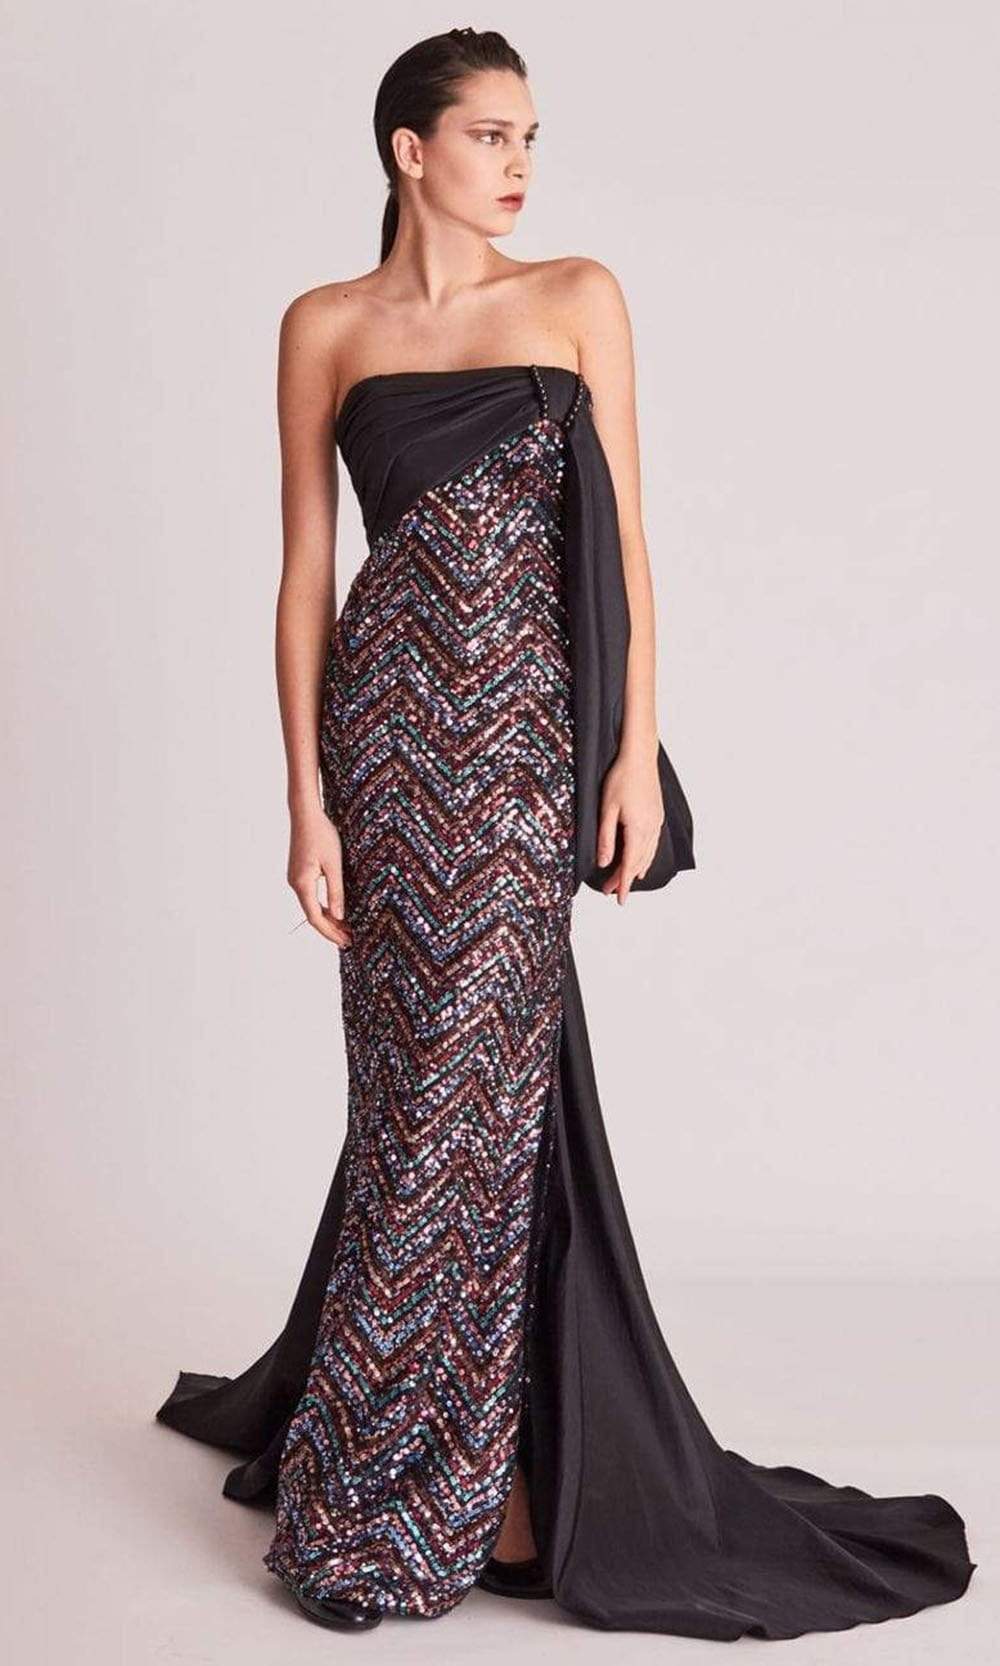 Image of Gatti Nolli Couture - OP5747 Multi-Color Sequined Sheath Gown